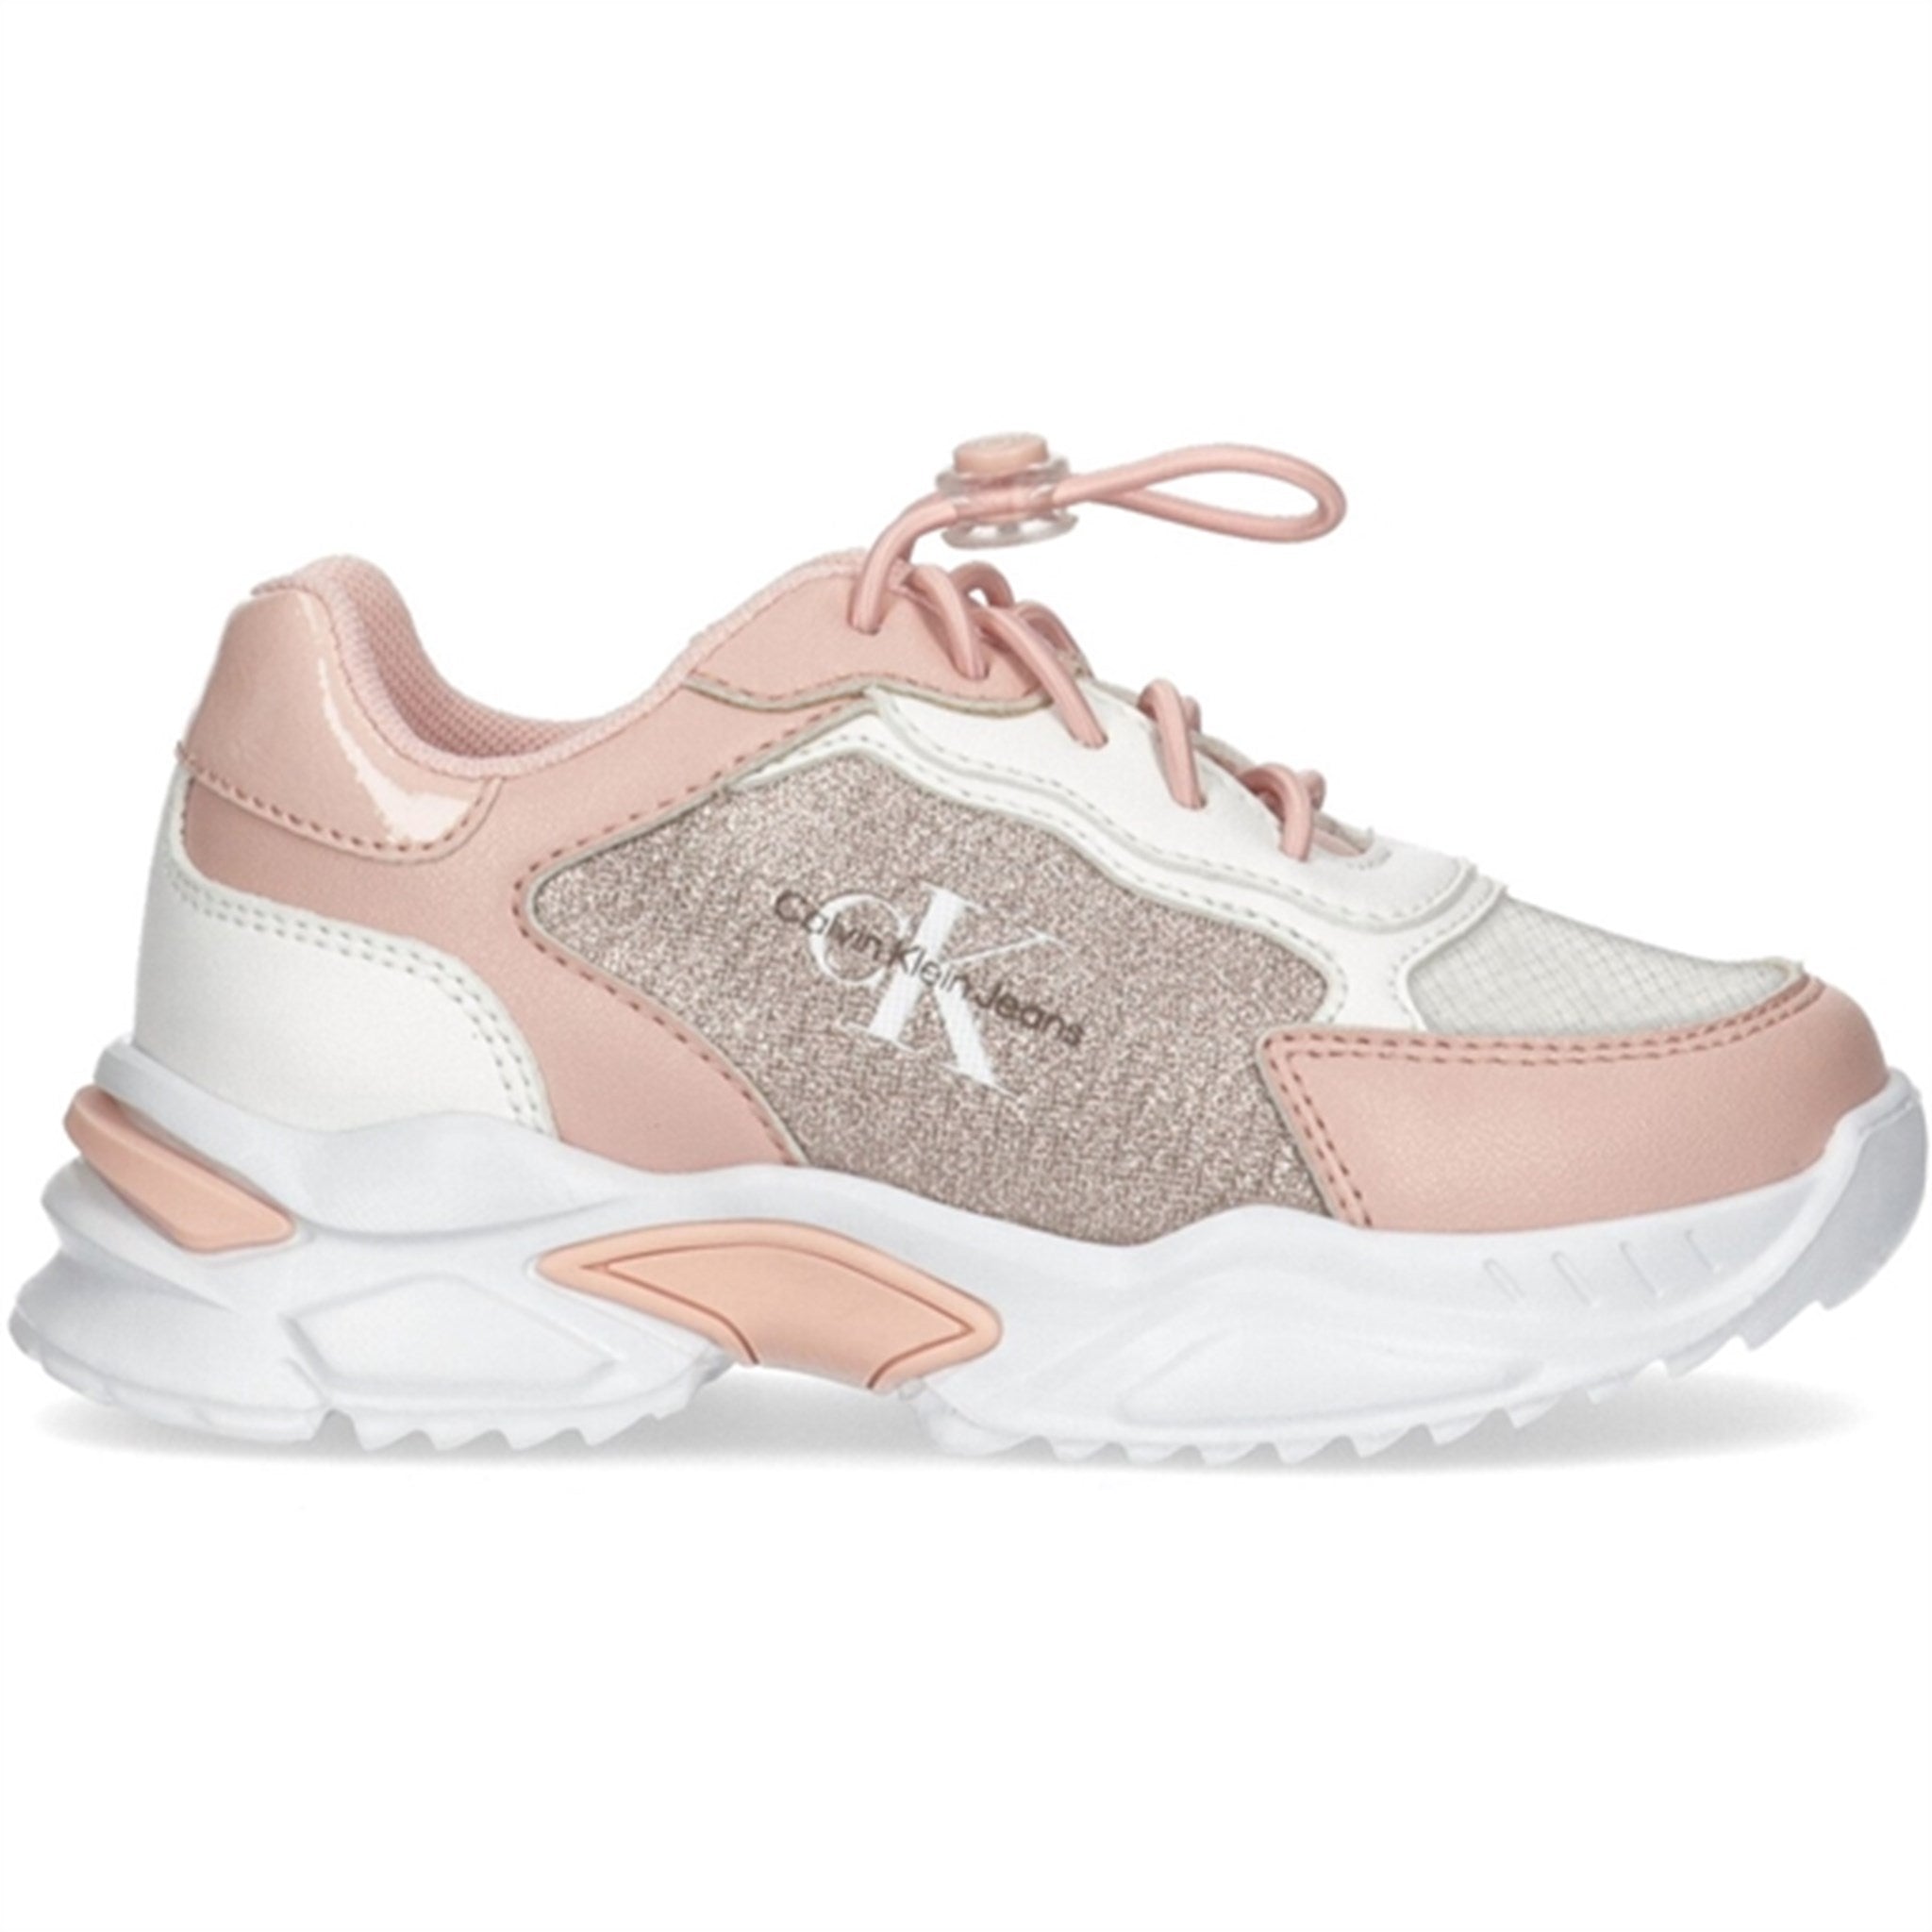 Calvin Klein Low Cut Lace-Up Sneakers Pink/White 4